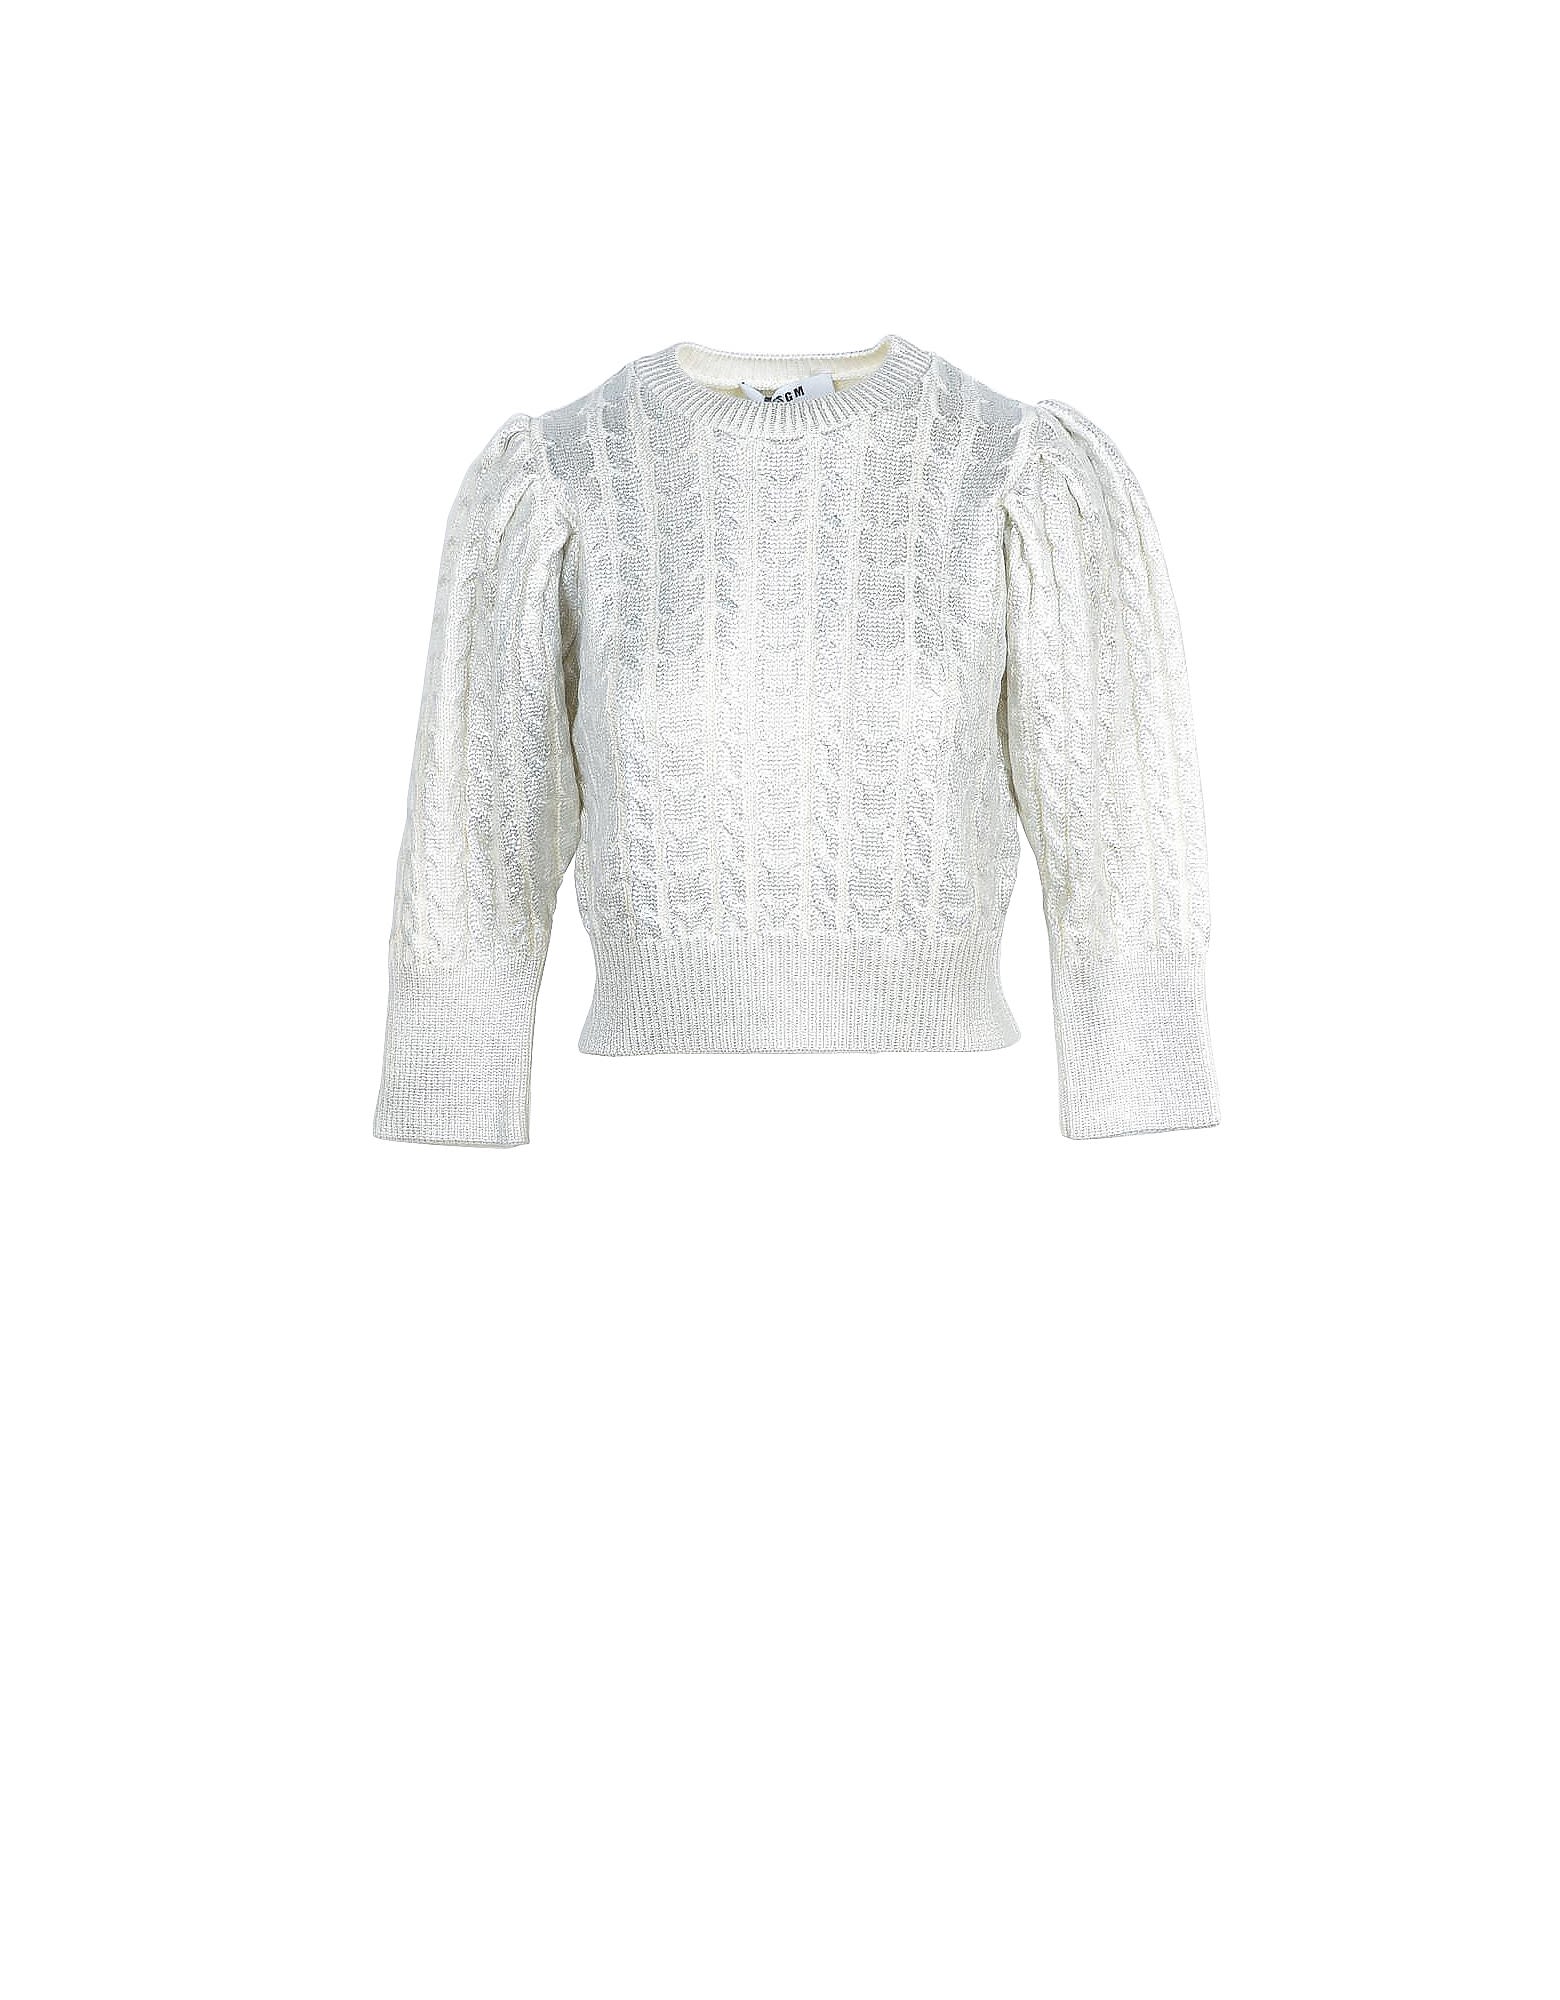 Msgm Womens Silver Sweater